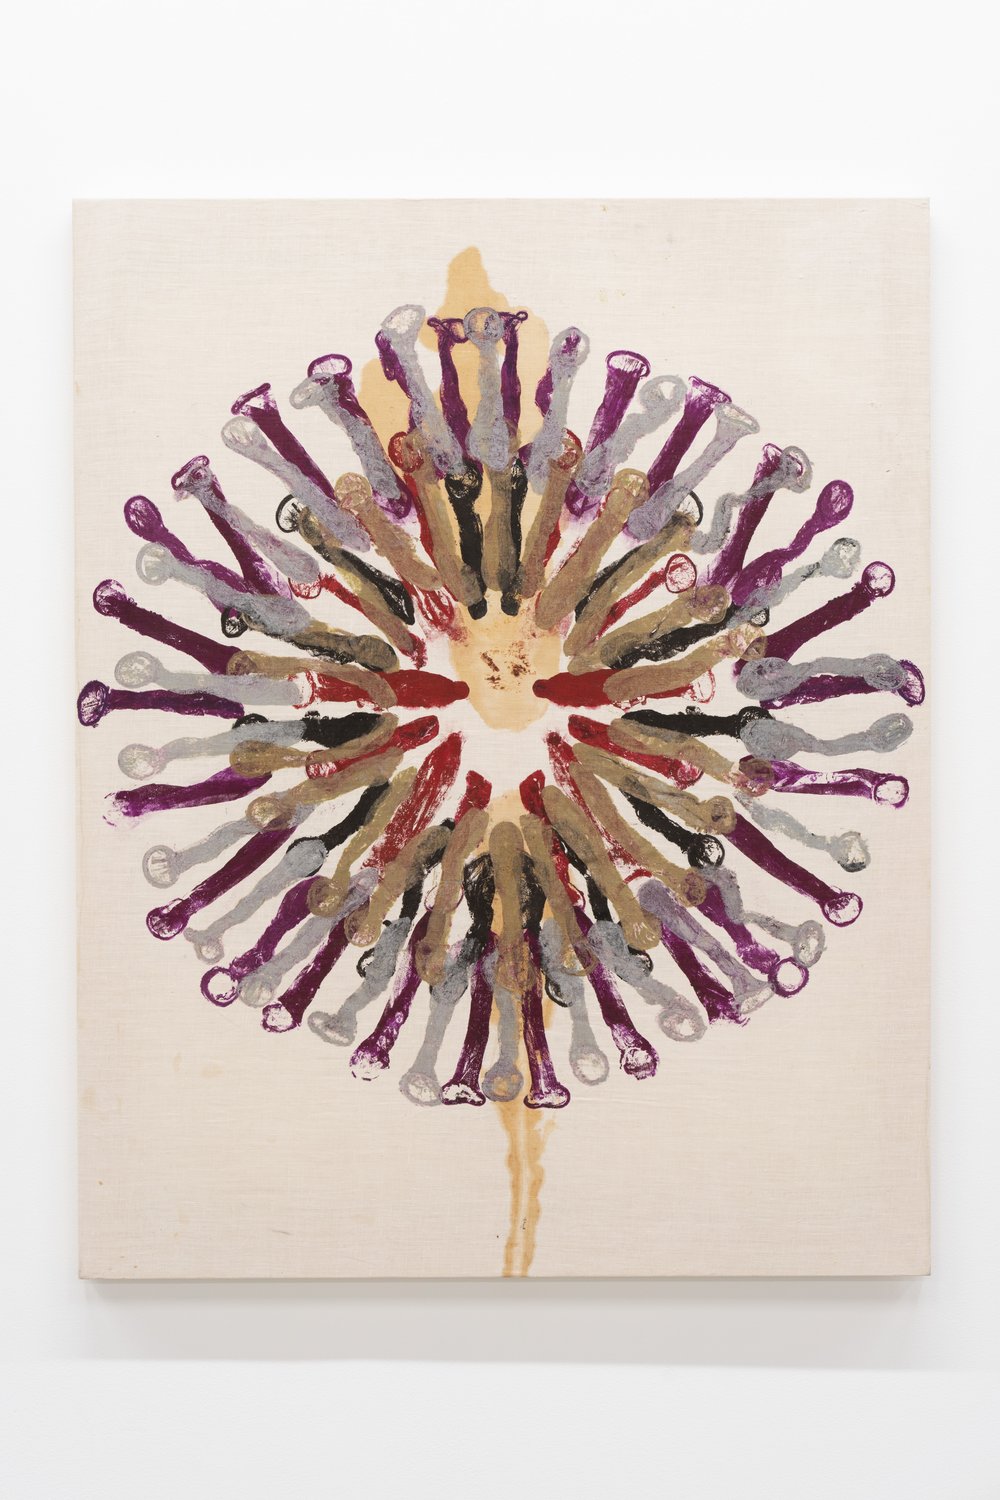  Chrysanne Stathacos,  Condom Mandala (Anne) , 1991. Oil on portrait linen with rose blood, 45 1/2 x 36 inches. Courtesy of the artist and Cooper Cole Gallery, Toronto. Photo: Nando Alvarez-Perez 